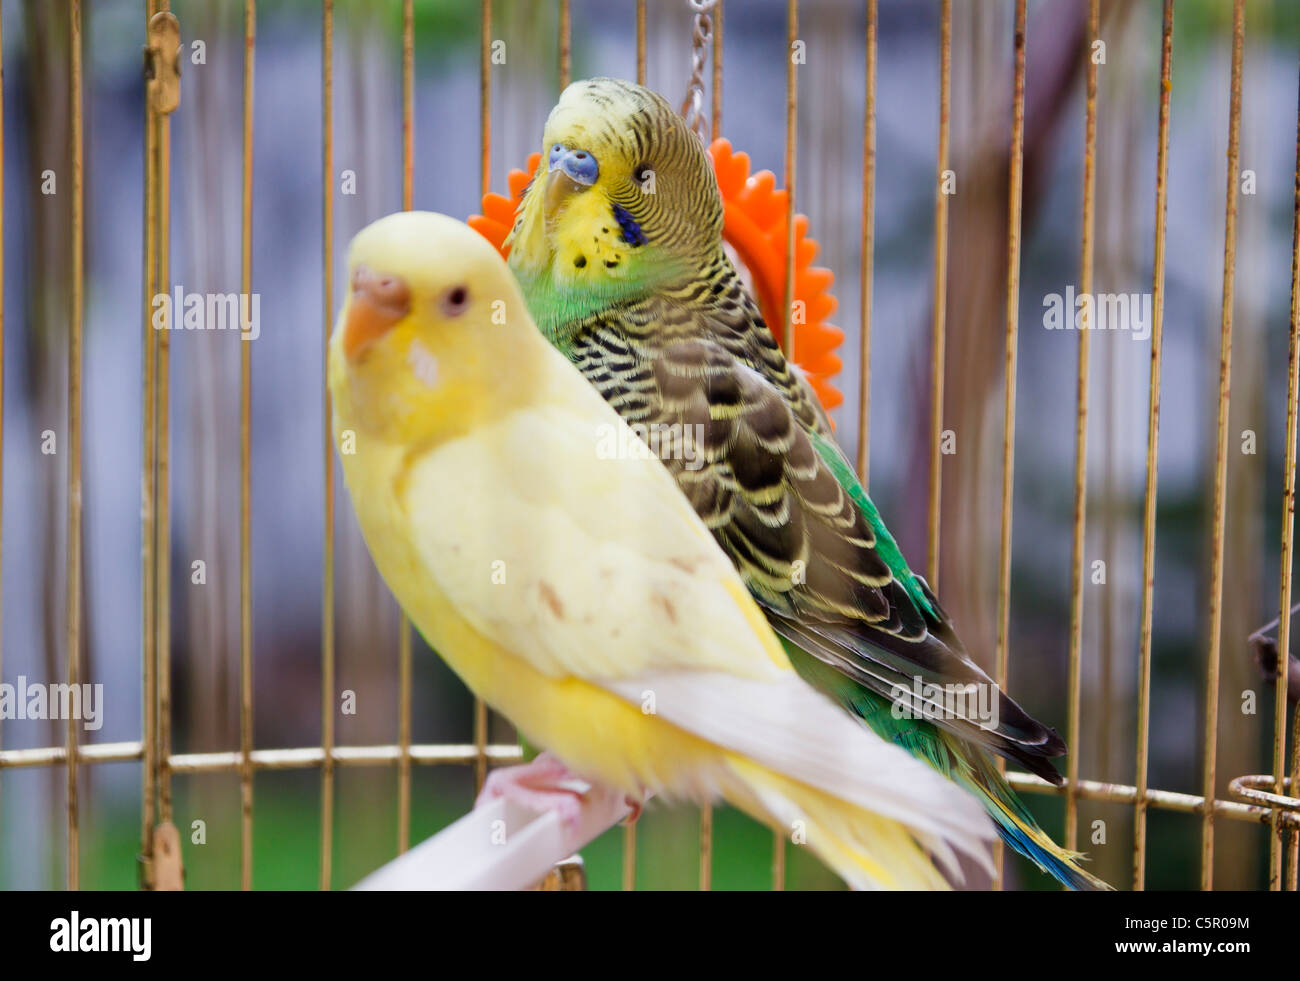 yellow and green parrots in  cage outdoor Stock Photo